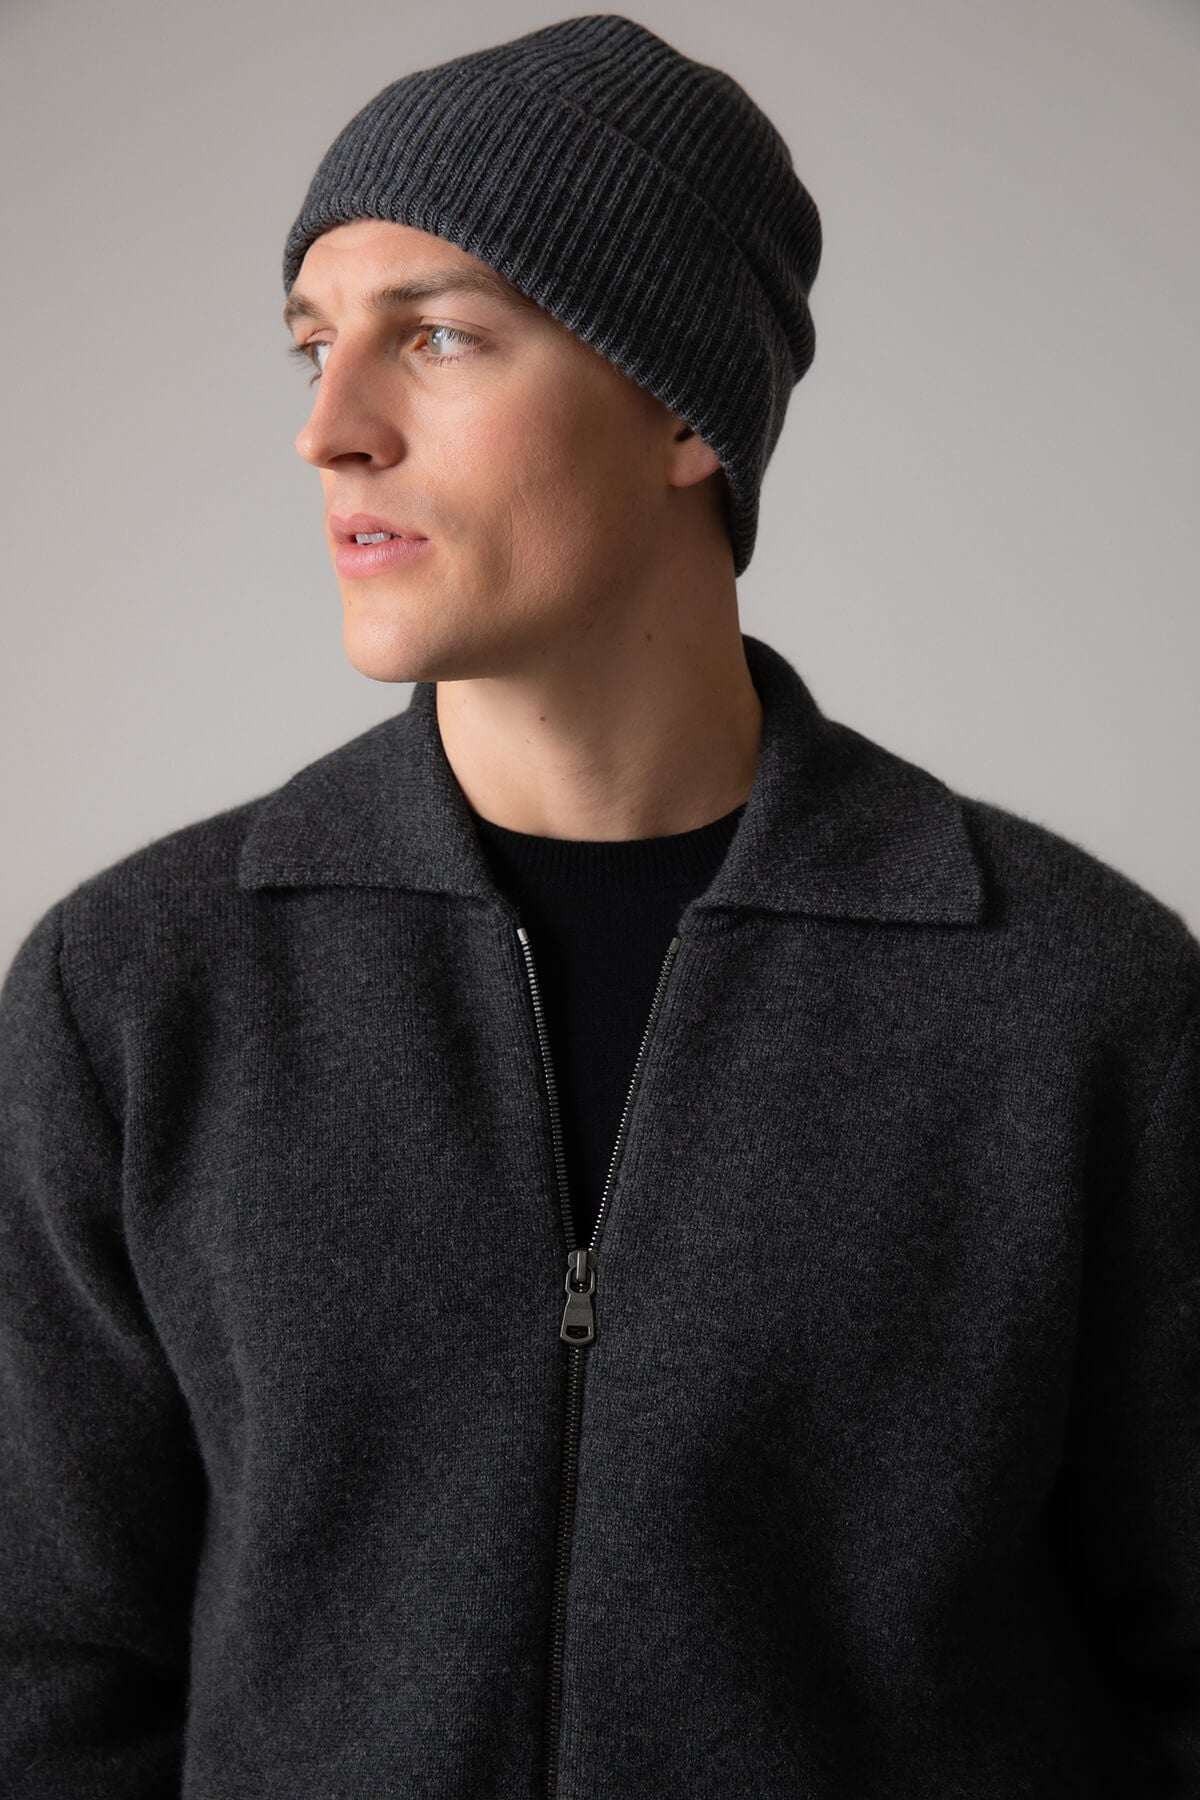 Johnstons of Elgin’s Mid Grey Slouchy Ribbed Cashmere Beanie worn by a Male on grey background HAE03325HA4181